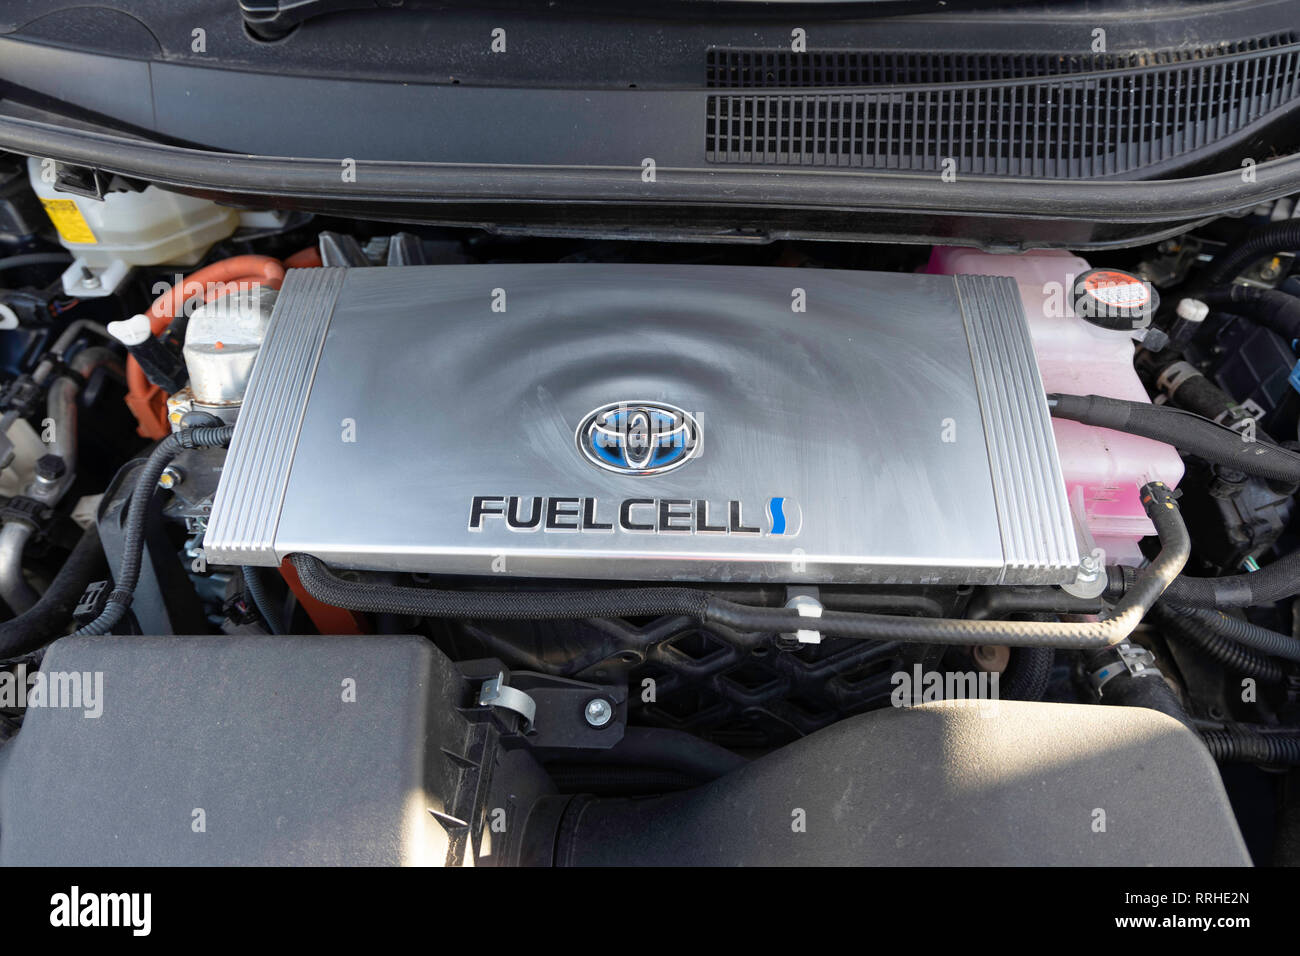 Hydrogen fuel cell power car engine Stock Photo